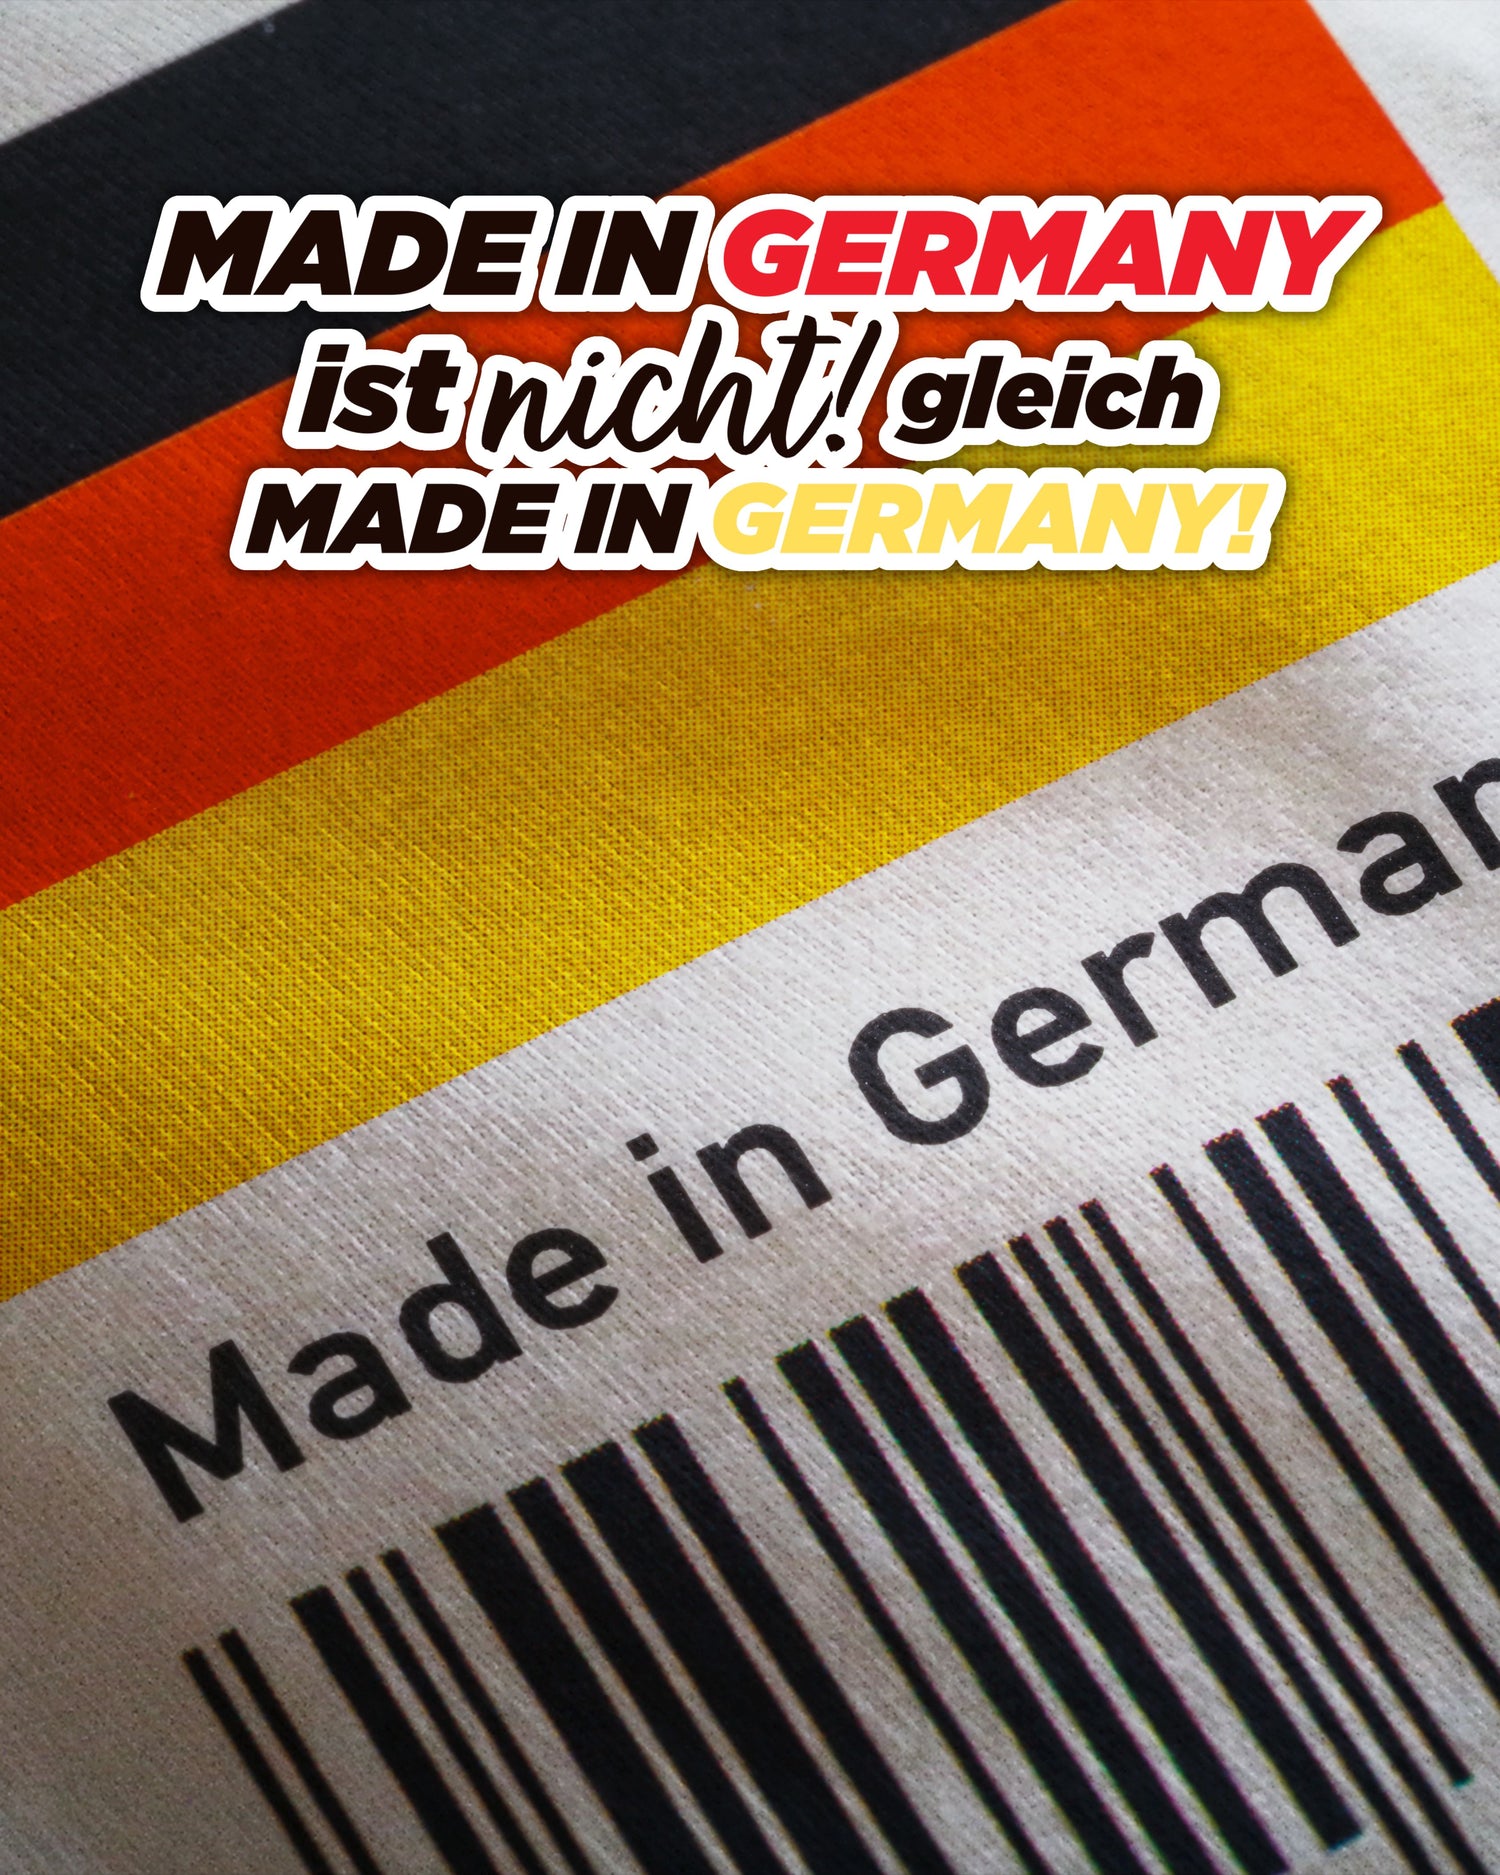 "MADE IN GERMANY" ist nicht gleich "MADE IN GERMANY" 🇩🇪⚠️